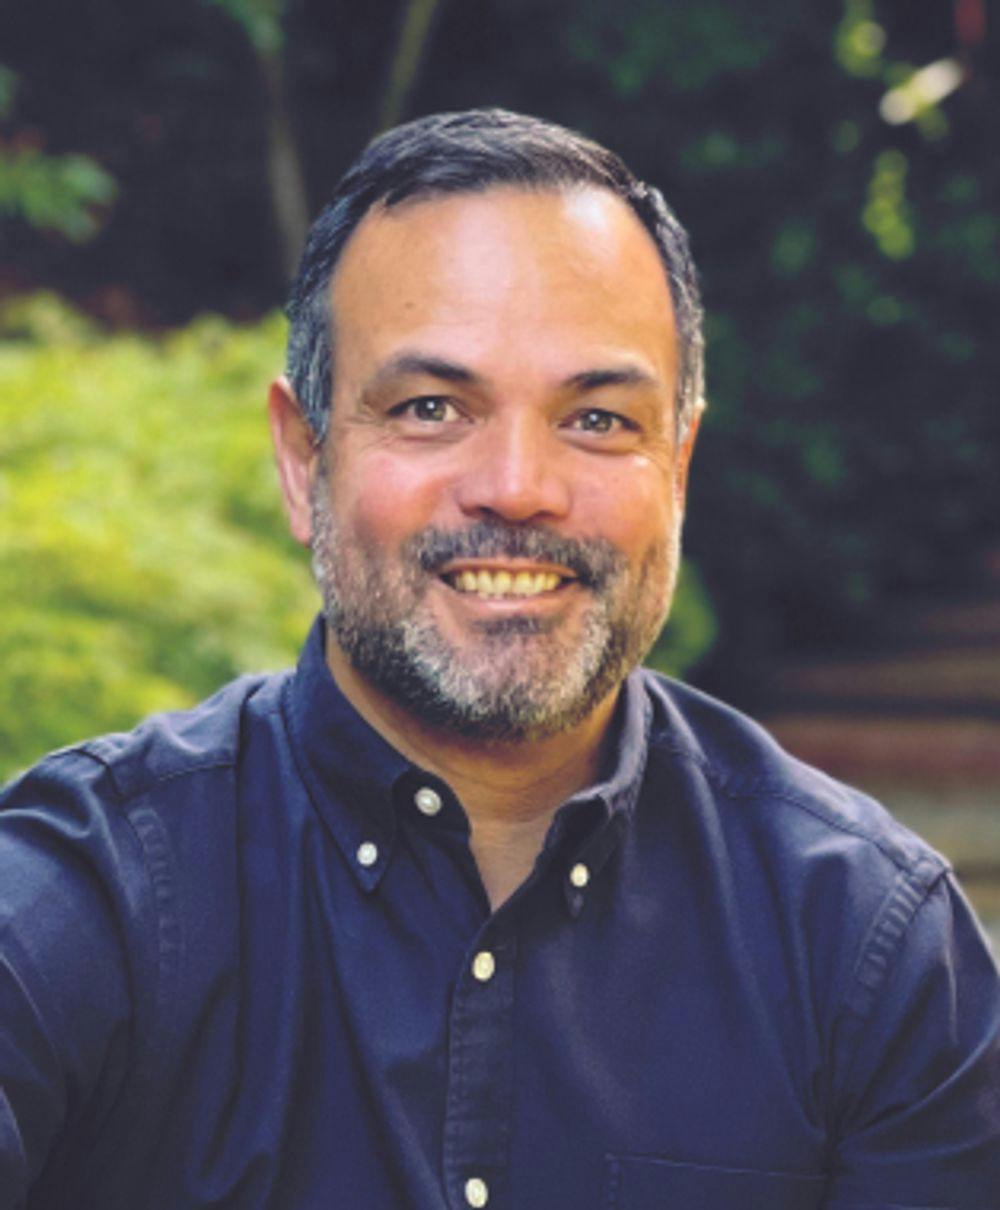 Rich Fernandez - Rich Fernandez is CEO of the Search Inside Yourself Leadership Institute (SIYLI), an organization originally developed at Google. Rich was previously Director of Executive Education at Google, and Head of Learning & Organizational Development at eBay.